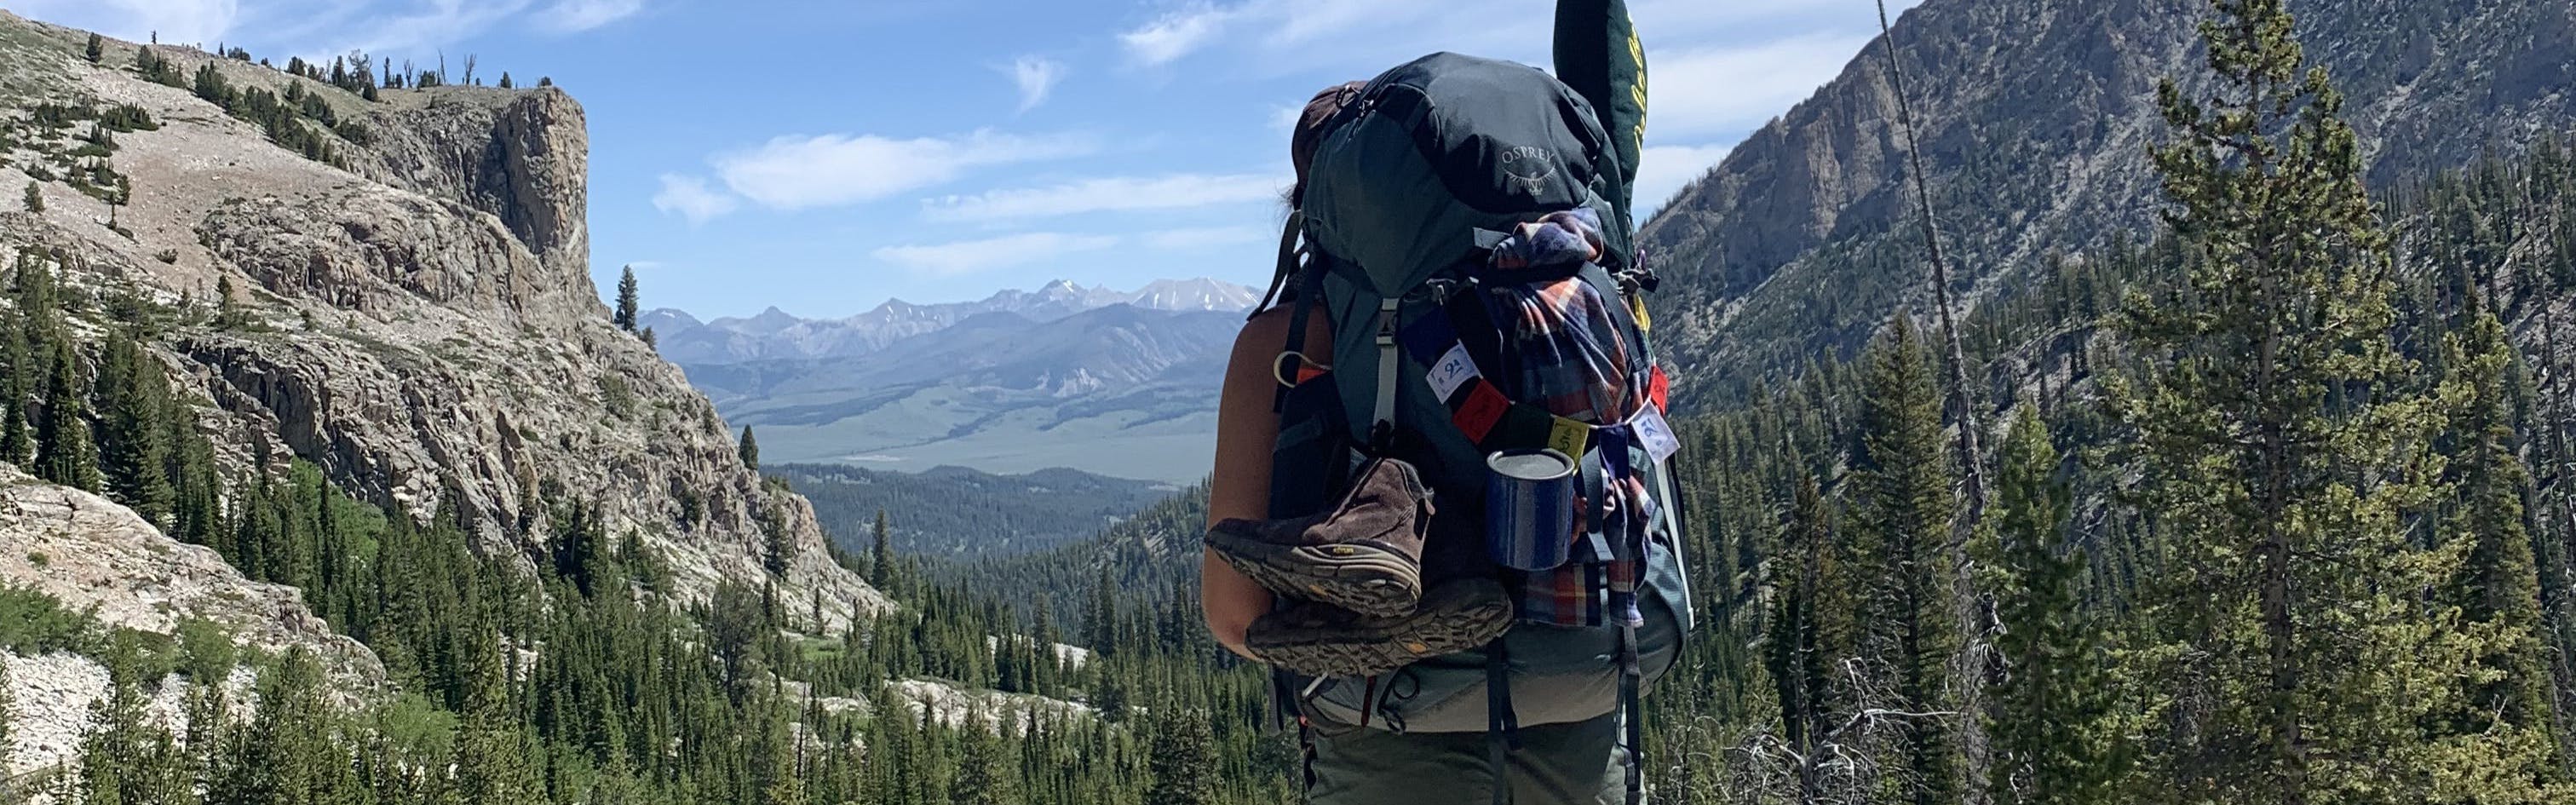 A woman with the Osprey Ariel 75 L backpacking backpack stands at the top of a lookout. There are mountains and rocky cliffs in the distance and attached to her pack are some shoes, a cup, and other camping equiptment.